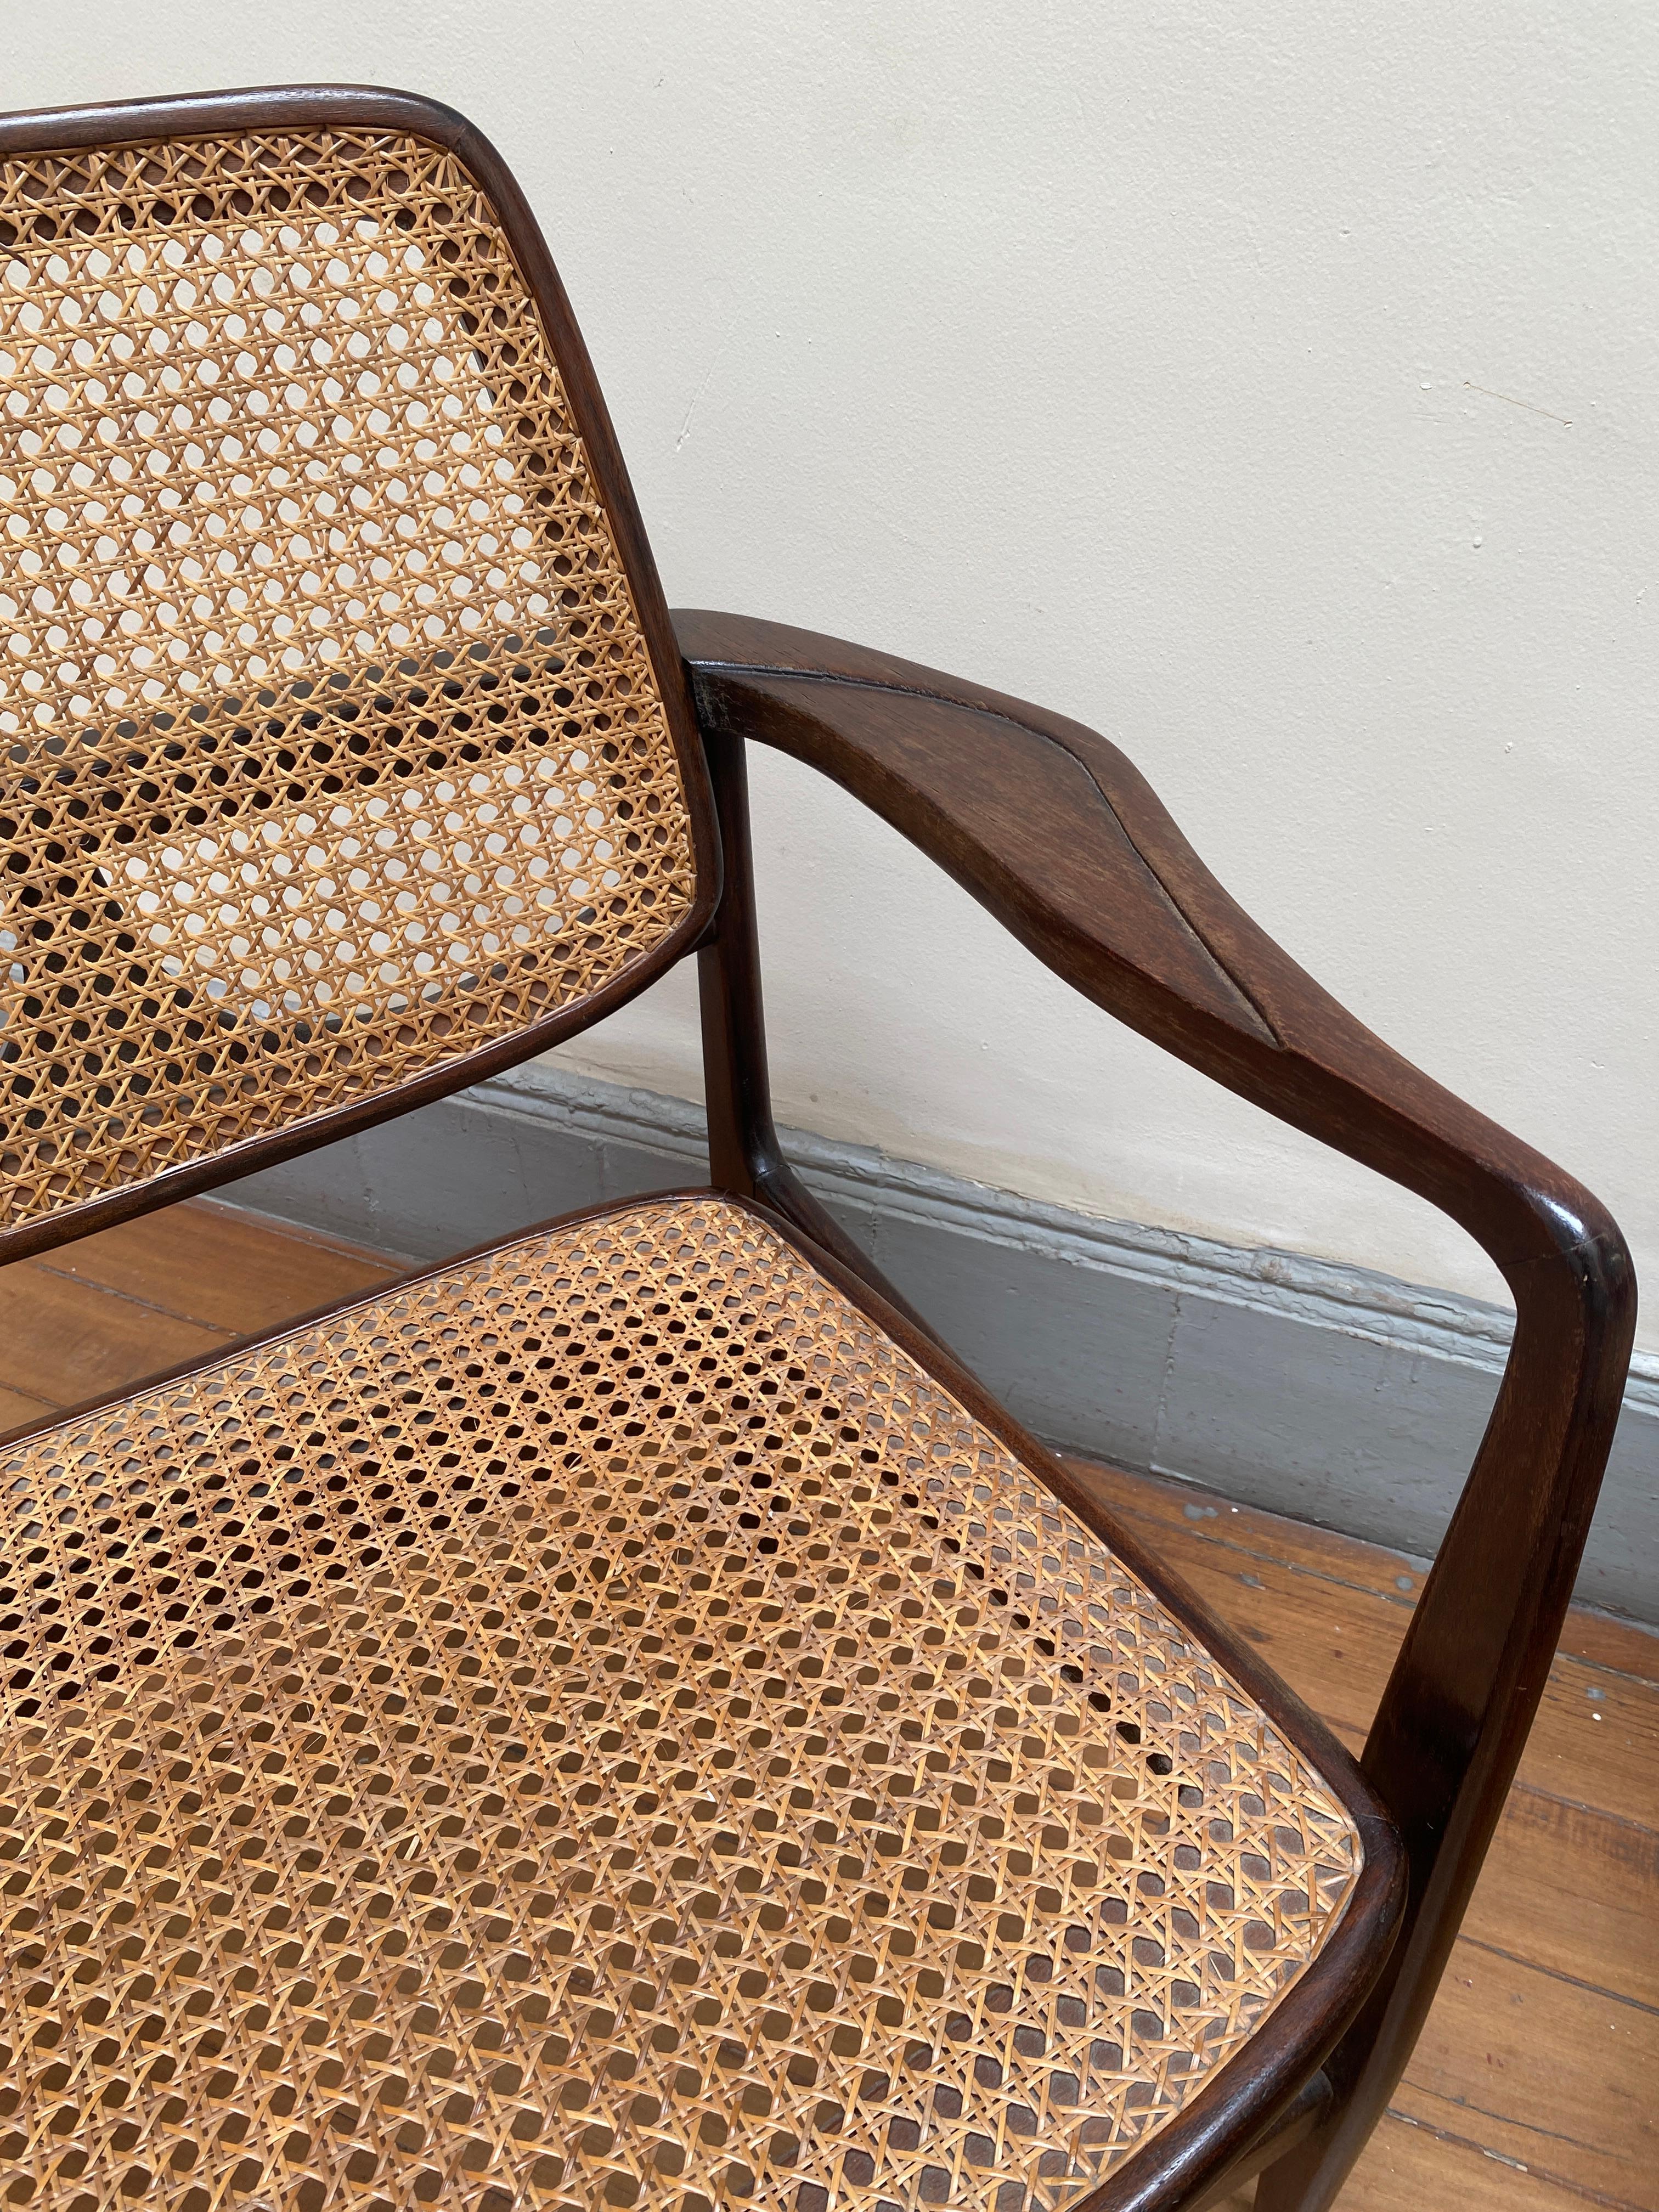 Cane Set of Two Mid-Century Modern Oscar Armchairs by Sergio Rodrigues, Brazil, 1956 For Sale